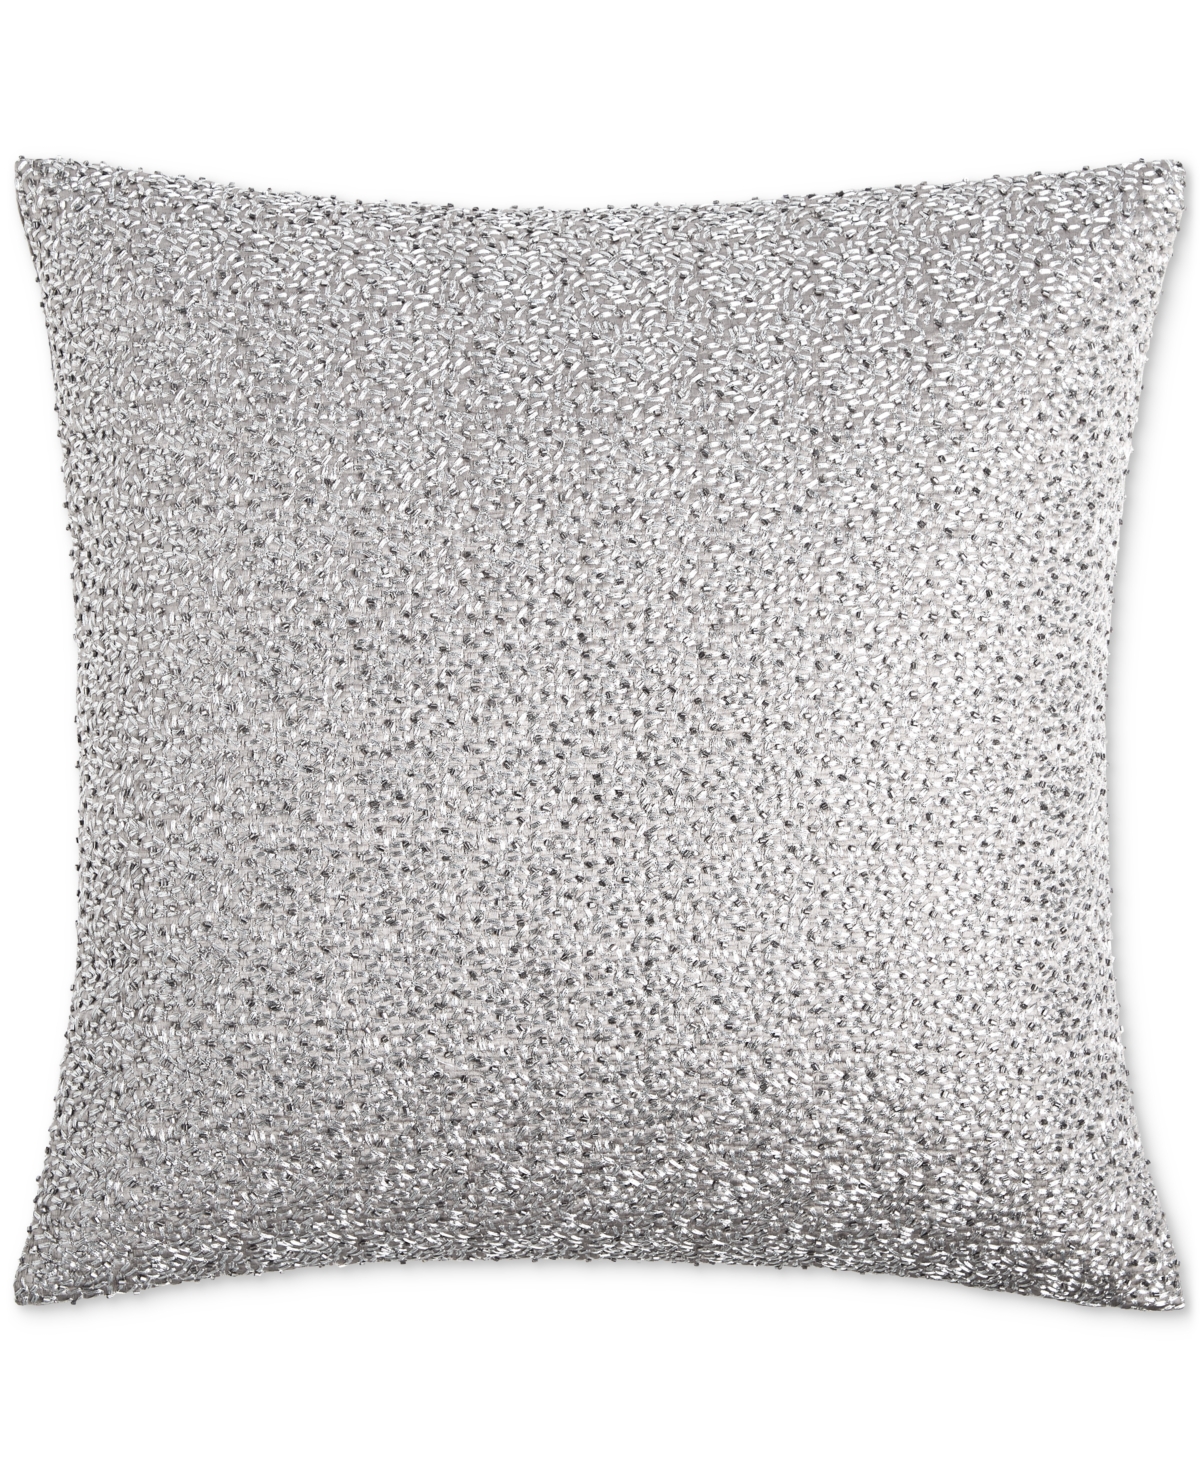 Hotel Collection Glint Decorative Pillow, 18" X 18", Created For Macy's In Charcoal